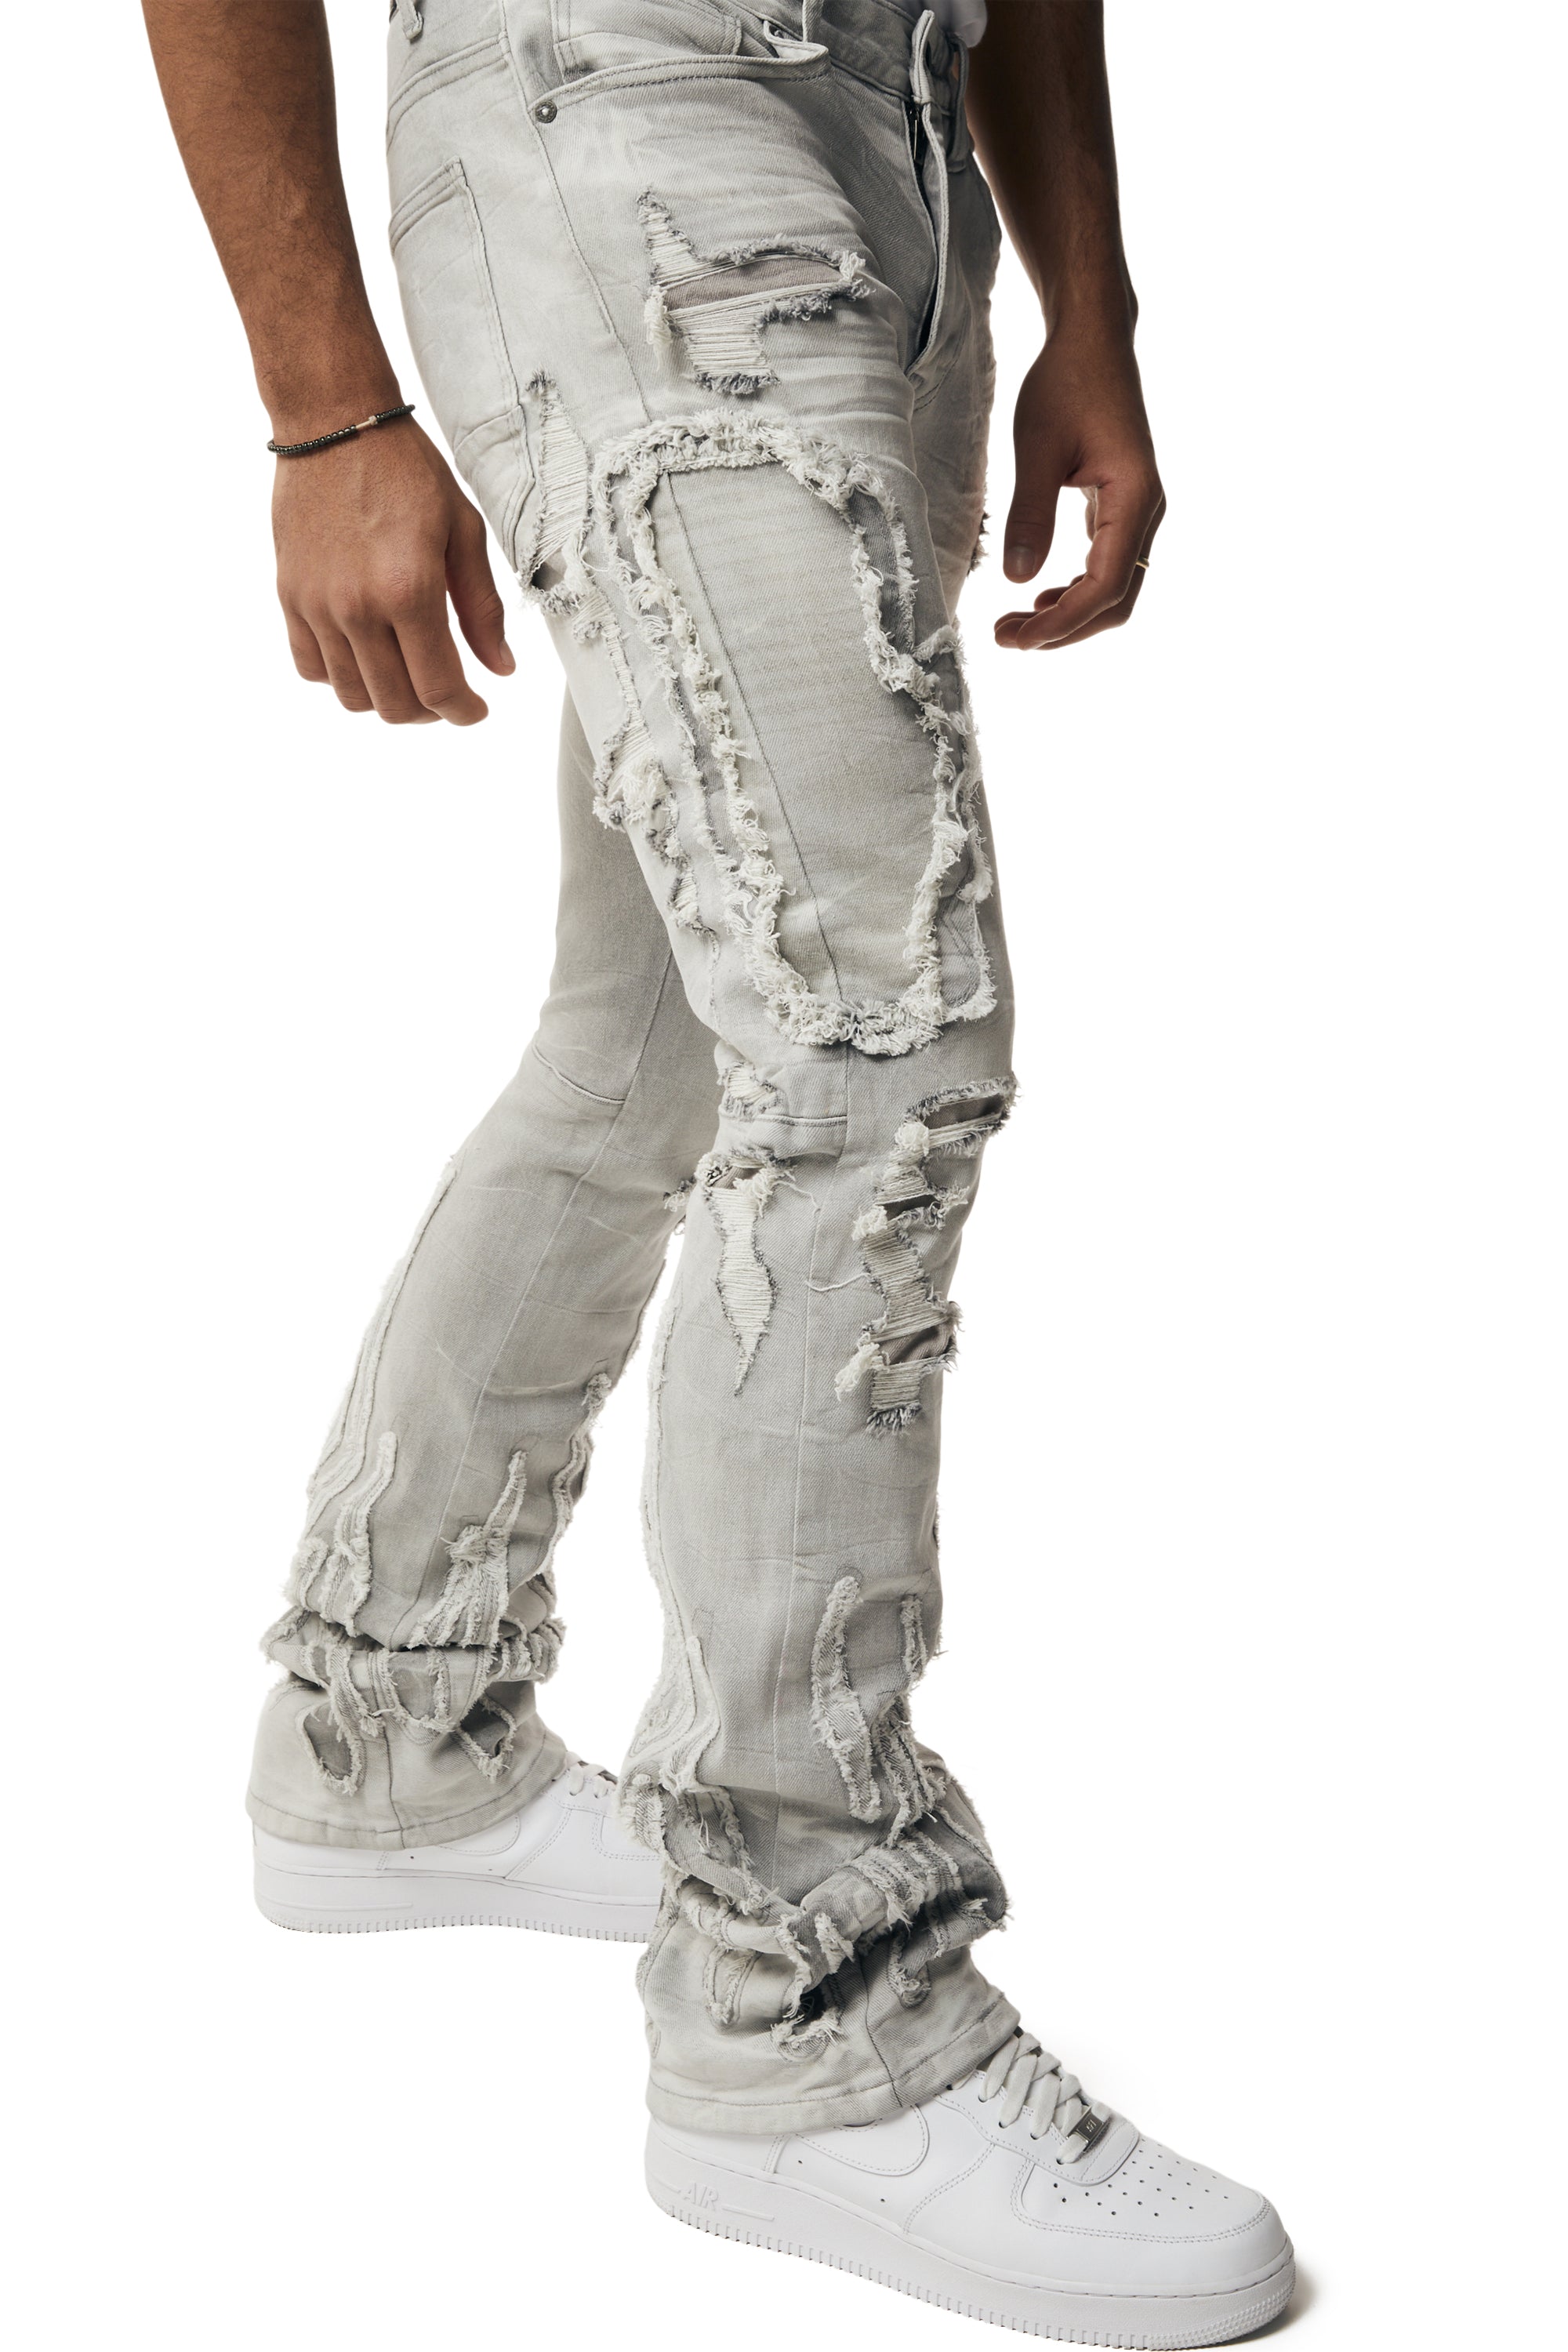 Flame Applique Heavy R&R Stacked Denim Jeans - Cloud Grey